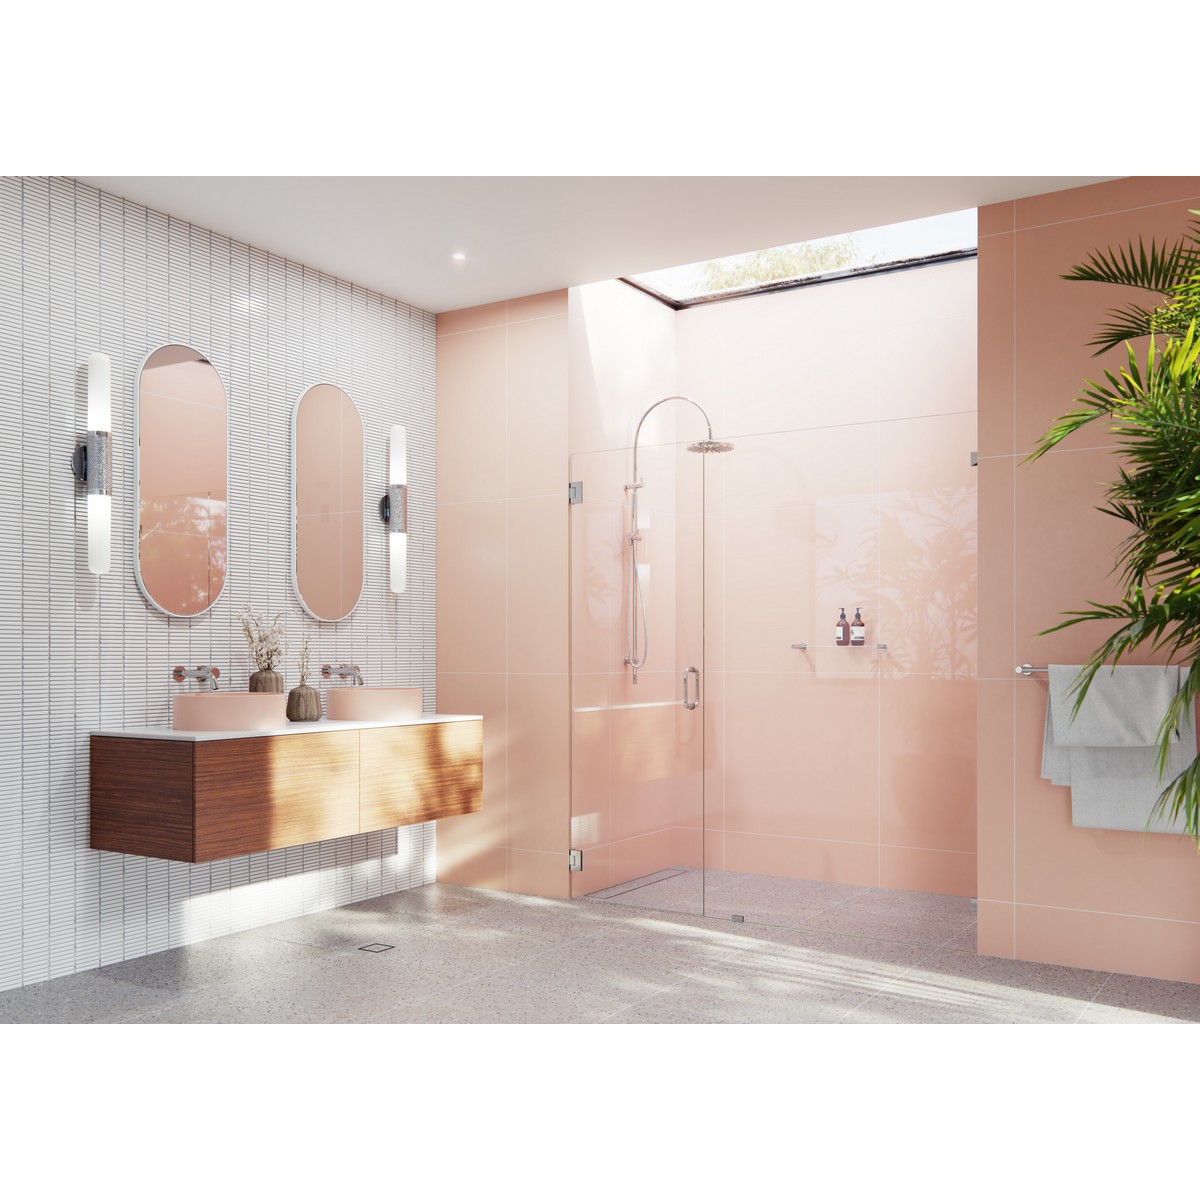 GLASS WAREHOUSE GW-WH-69 ILLUME 69 W X 78 H WALL HINGED FULLY FRAMELESS GLASS SHOWER ENCLOSURE